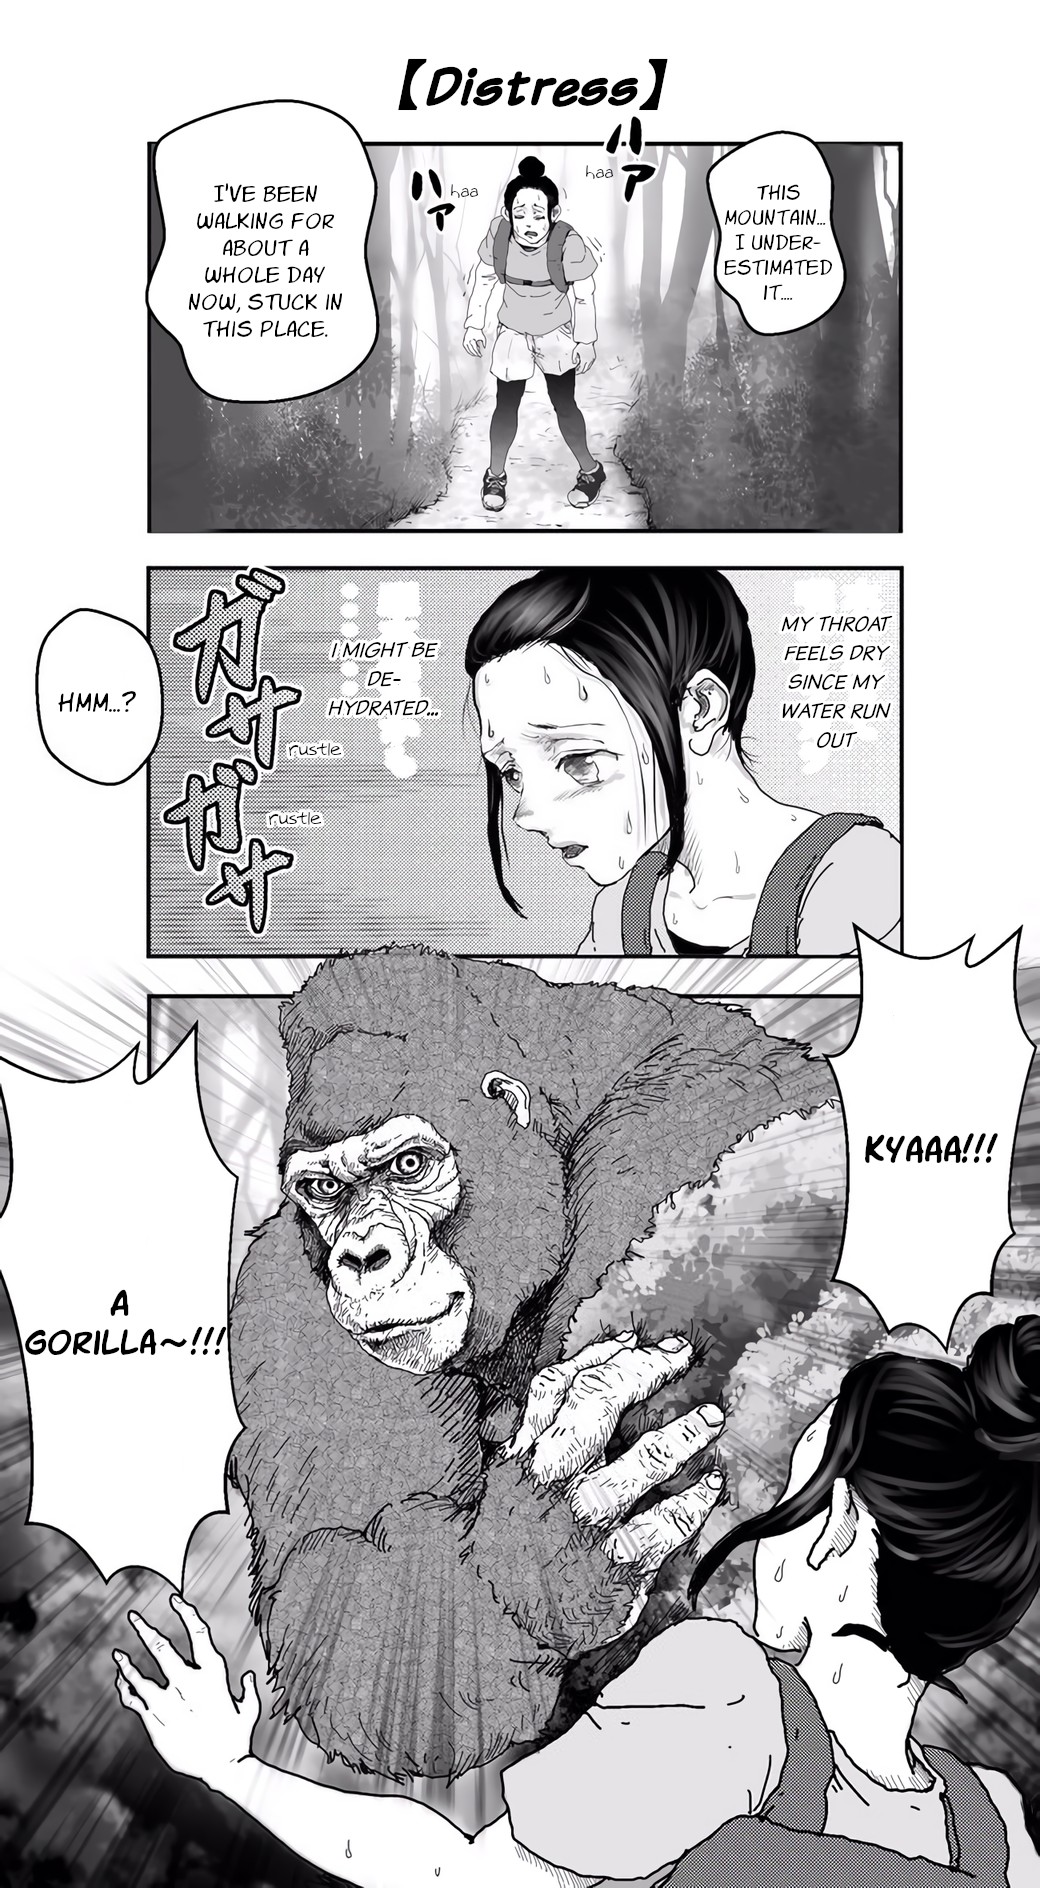 An Extremely Attractive Gorilla - Page 1